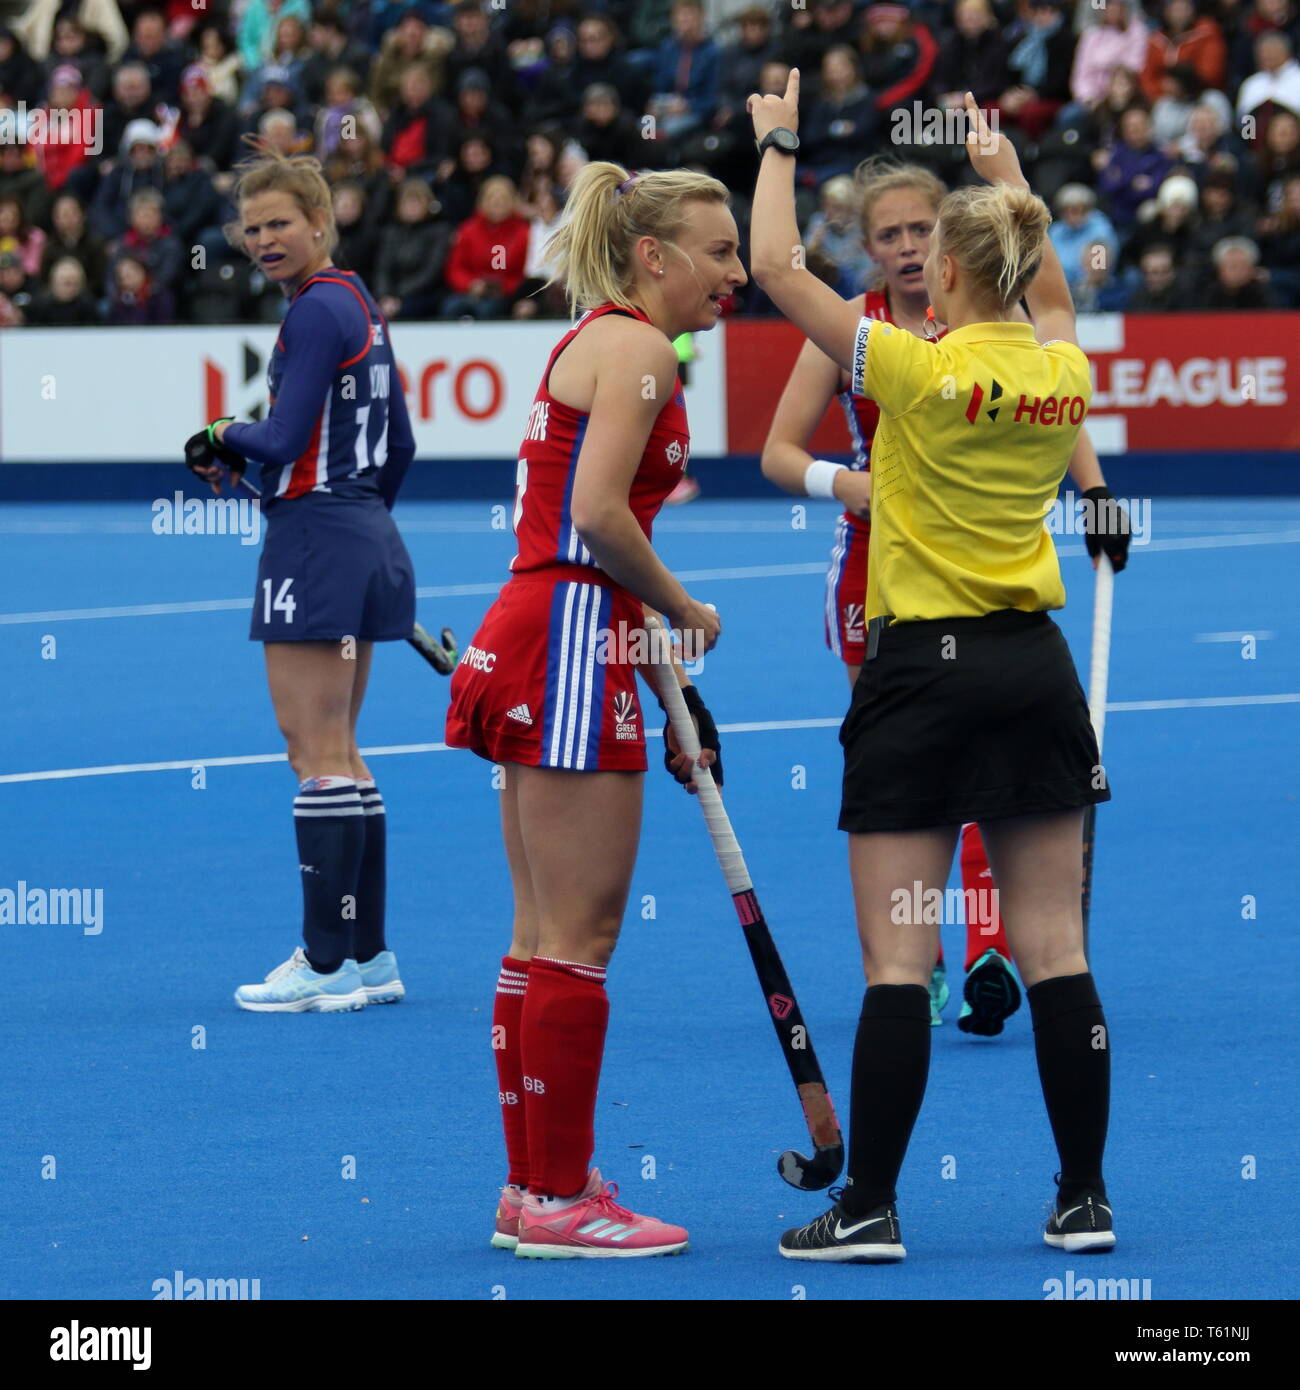 Hannah Martin (GBR) appealing to referee in the 2019 FIH Pro League Great Britain v United States women’s hockey match at the Olympic Park, London Stock Photo